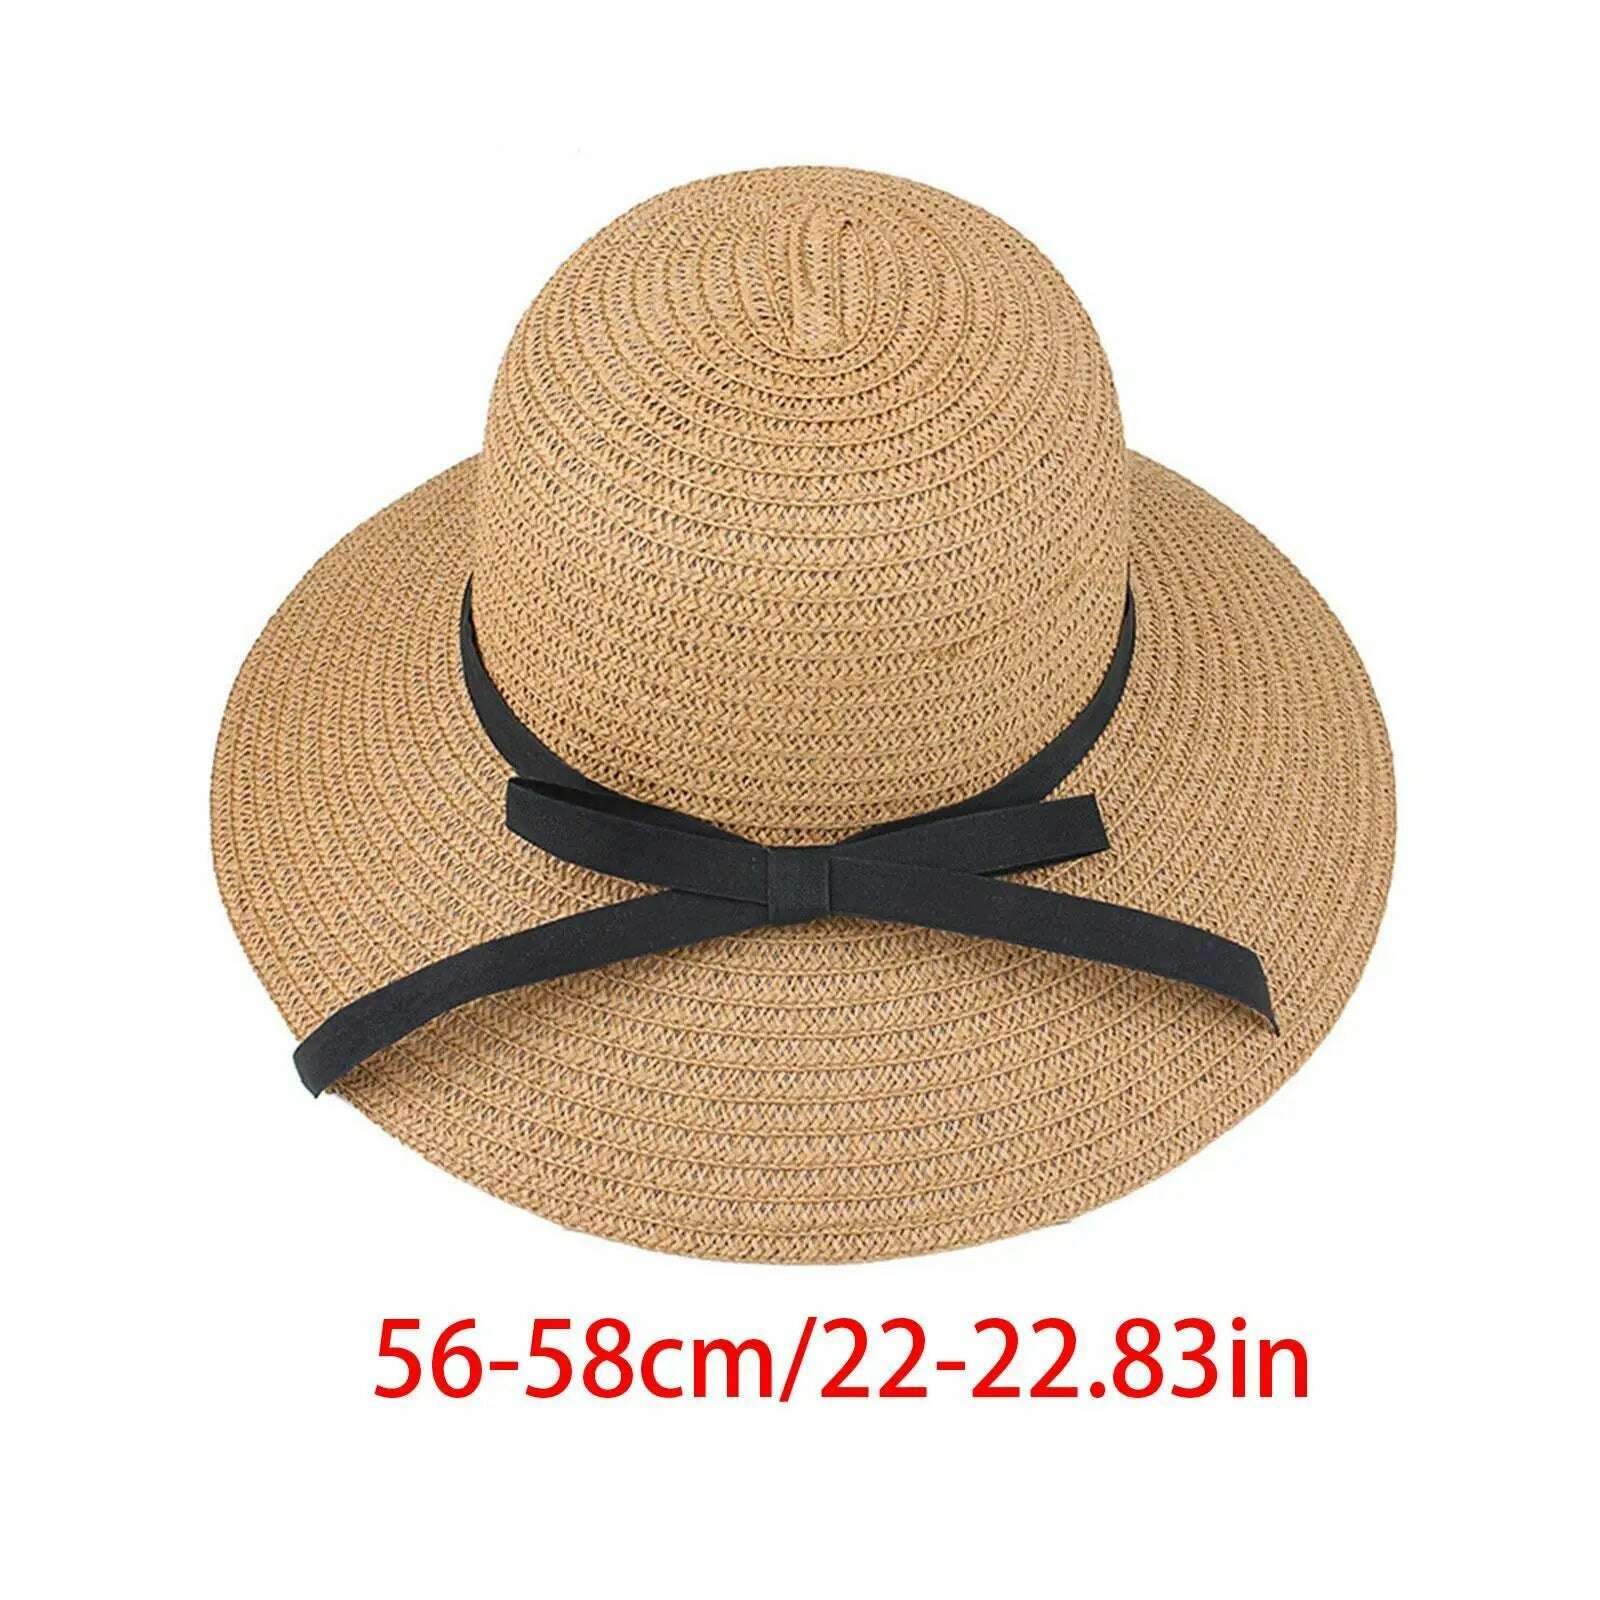 KIMLUD, Women's Straw Sun Hat Wide Brim Flat Beach Hat Summer Sun Protection Cowboy Style Hat Rolled Up Packable Panama Hats, B style Khaki / One Size / China, KIMLUD Womens Clothes